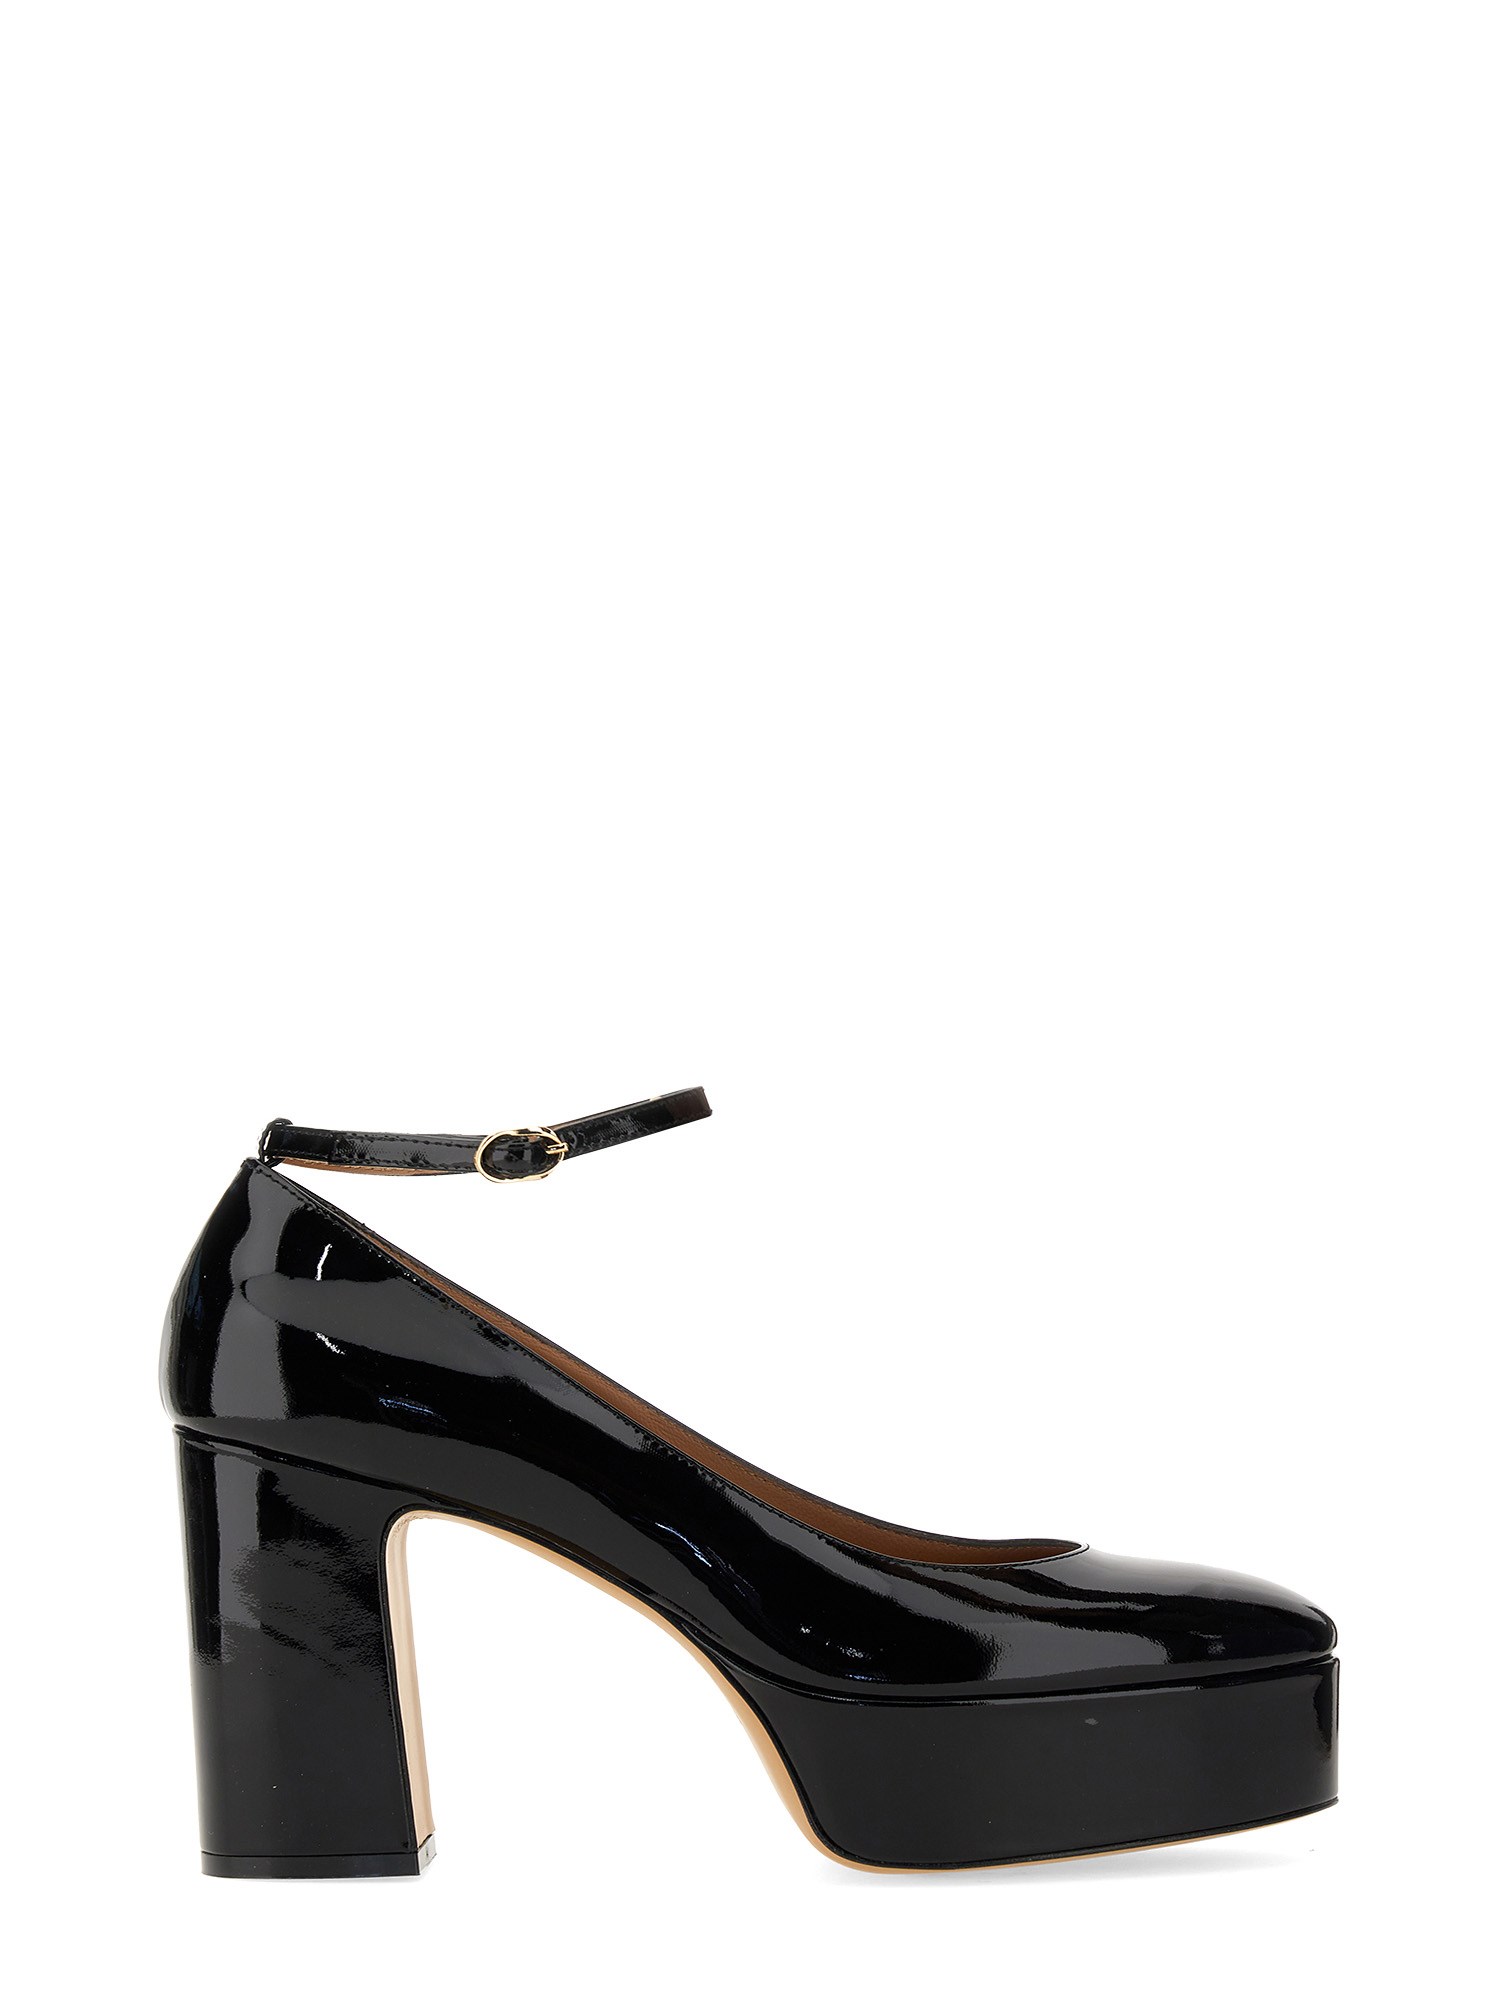 ROBERTO FESTA PATENT LEATHER PUMPS WITH STRAP